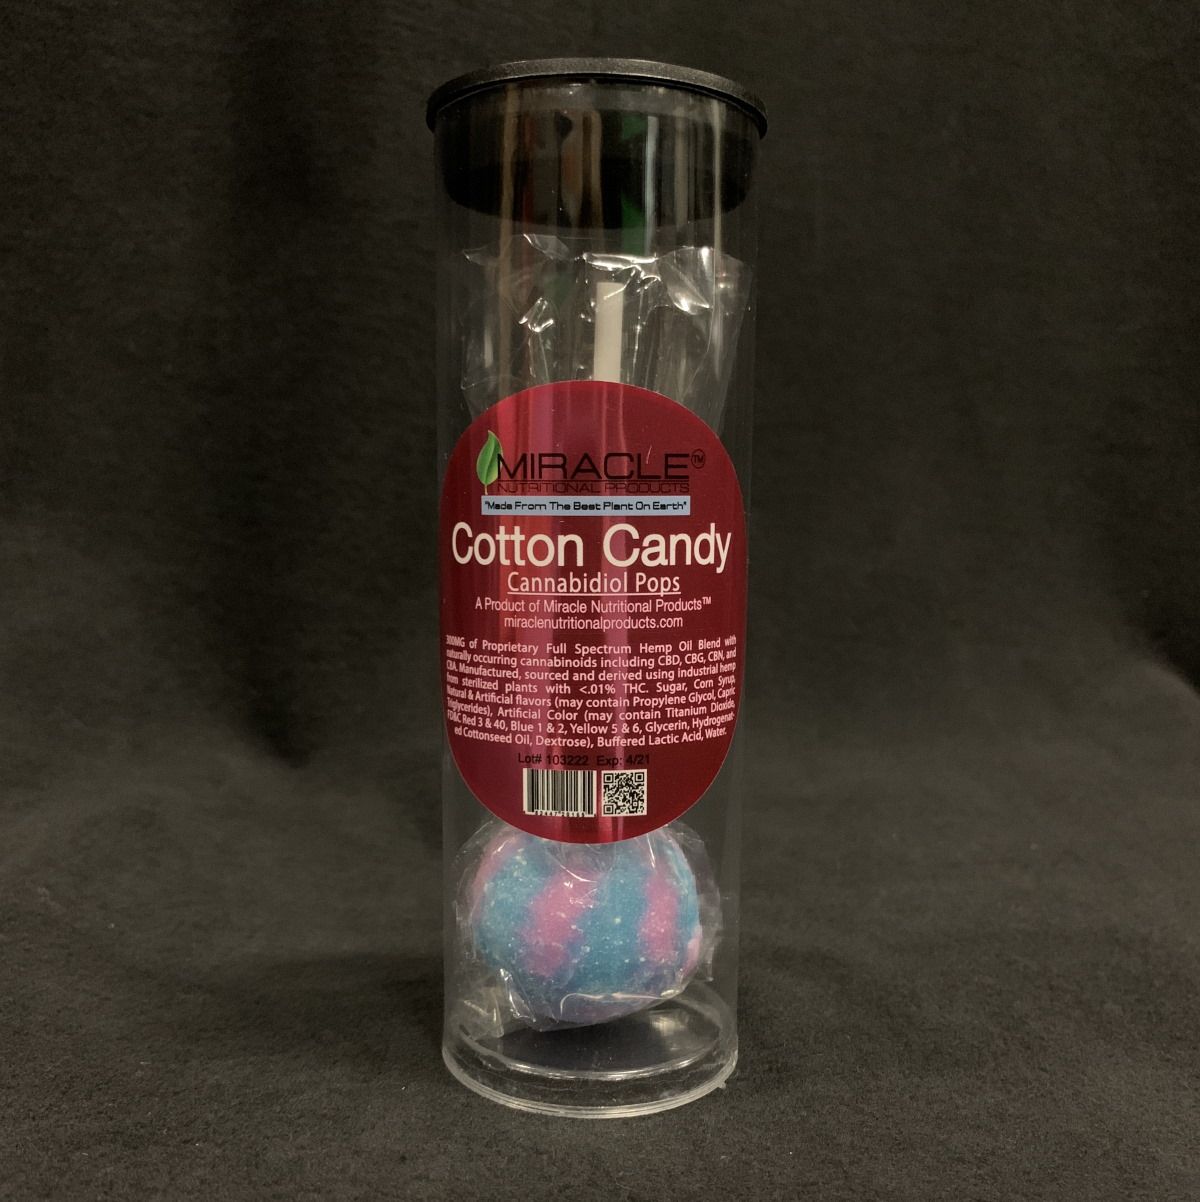 Miracle Nutritional Products Cotton Candy Cannabidiol Pops. (WTHR)